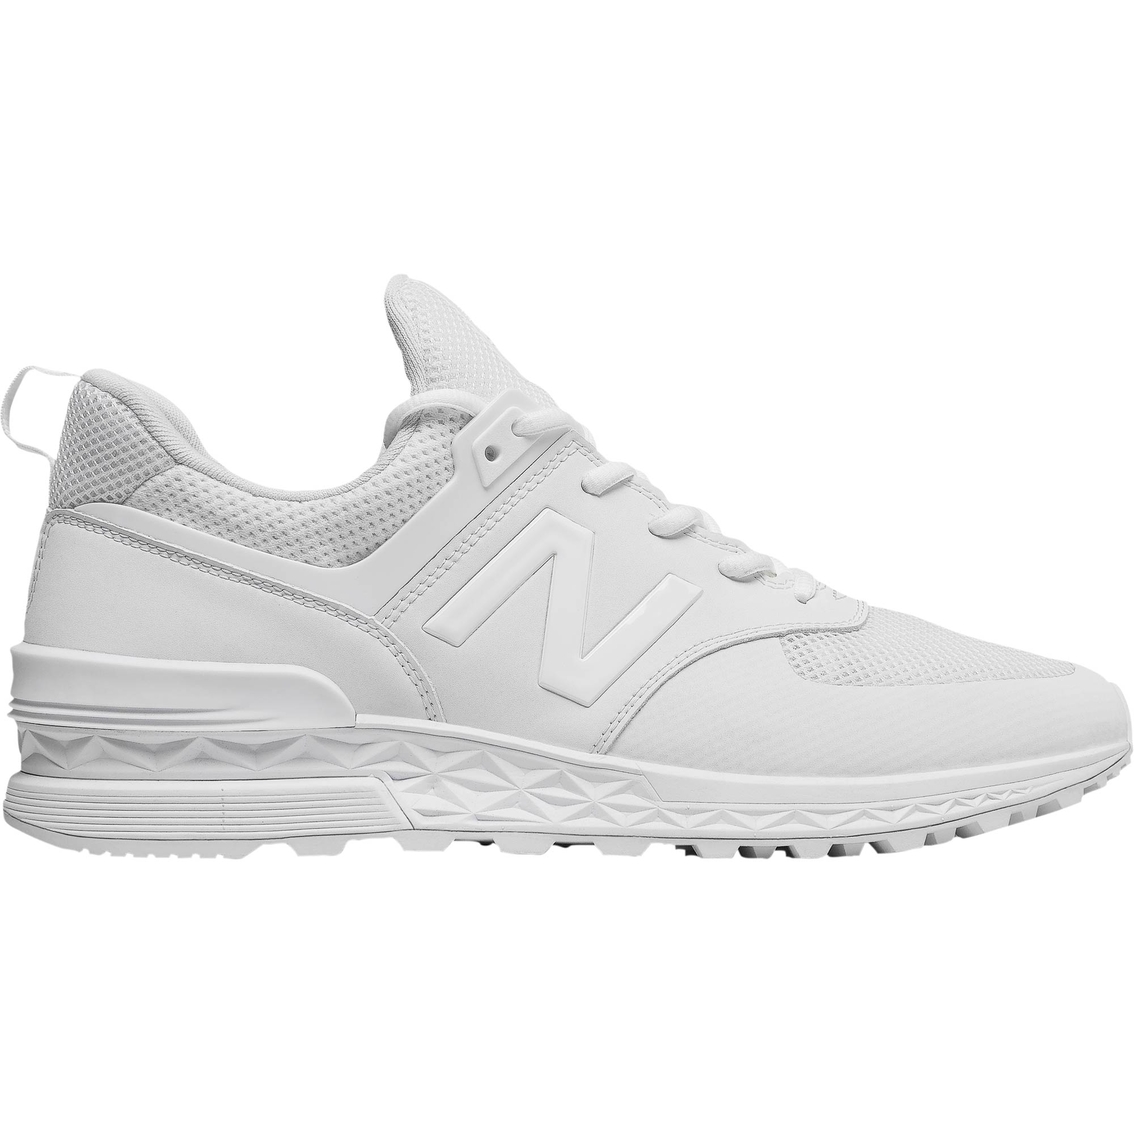 New Balance Men's Ms574swt Lifestyle Athleisure Sneakers ...